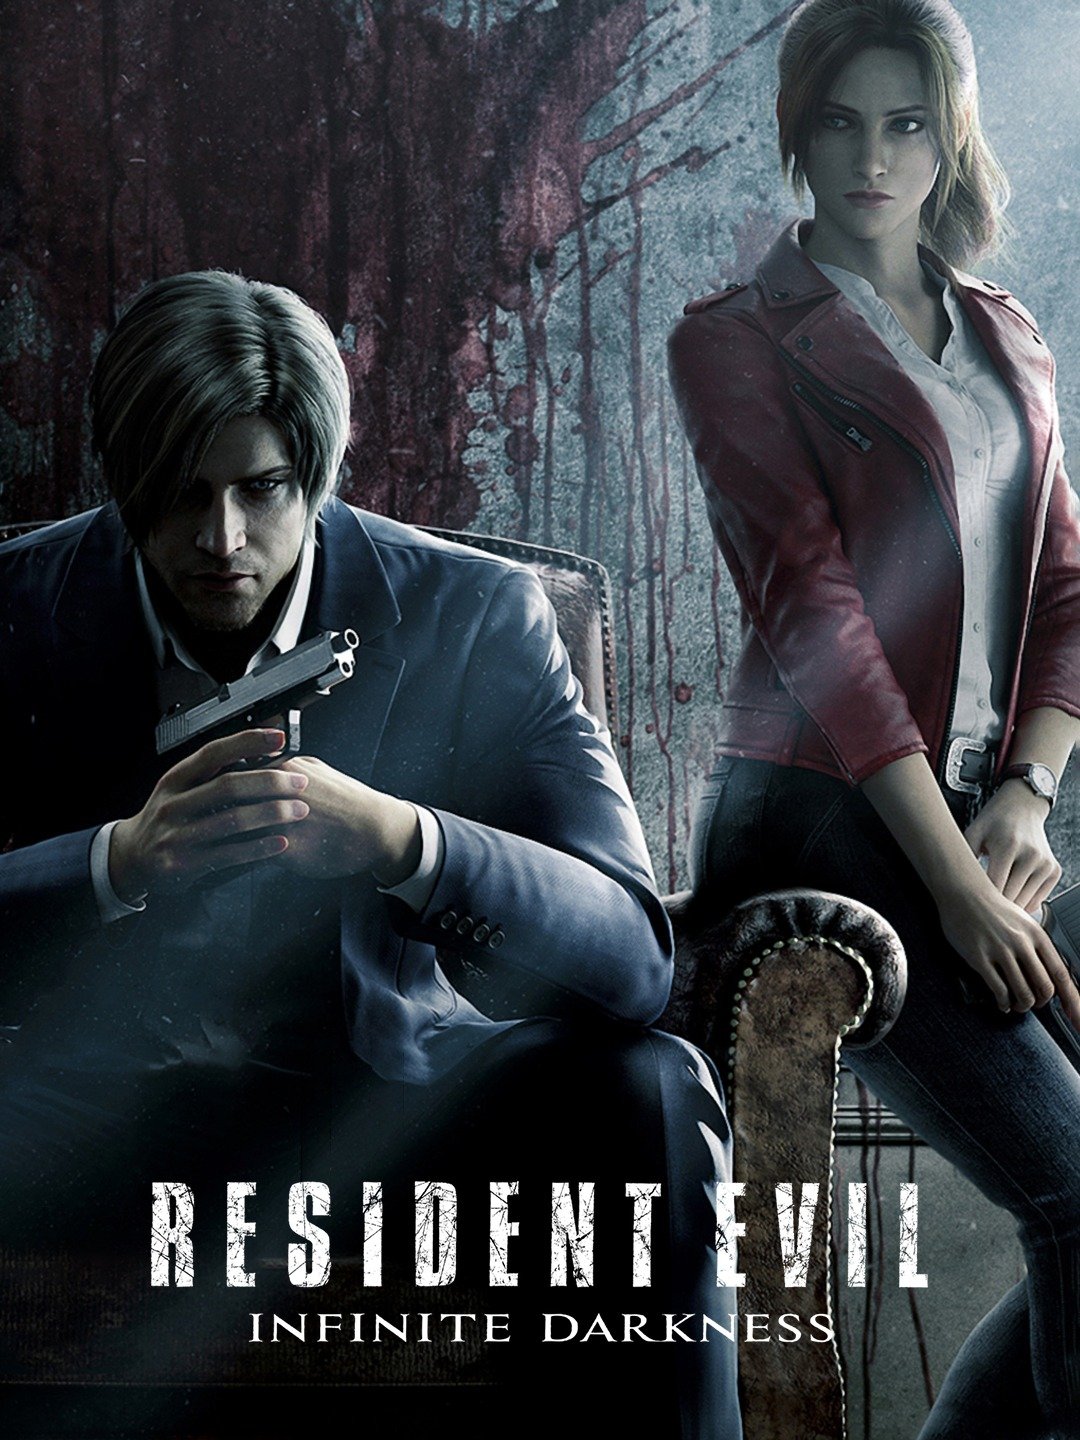 Resident Evil Infinite Darkness Hindi Dubbed Leaked Online Full HD  Available For Free Download Online